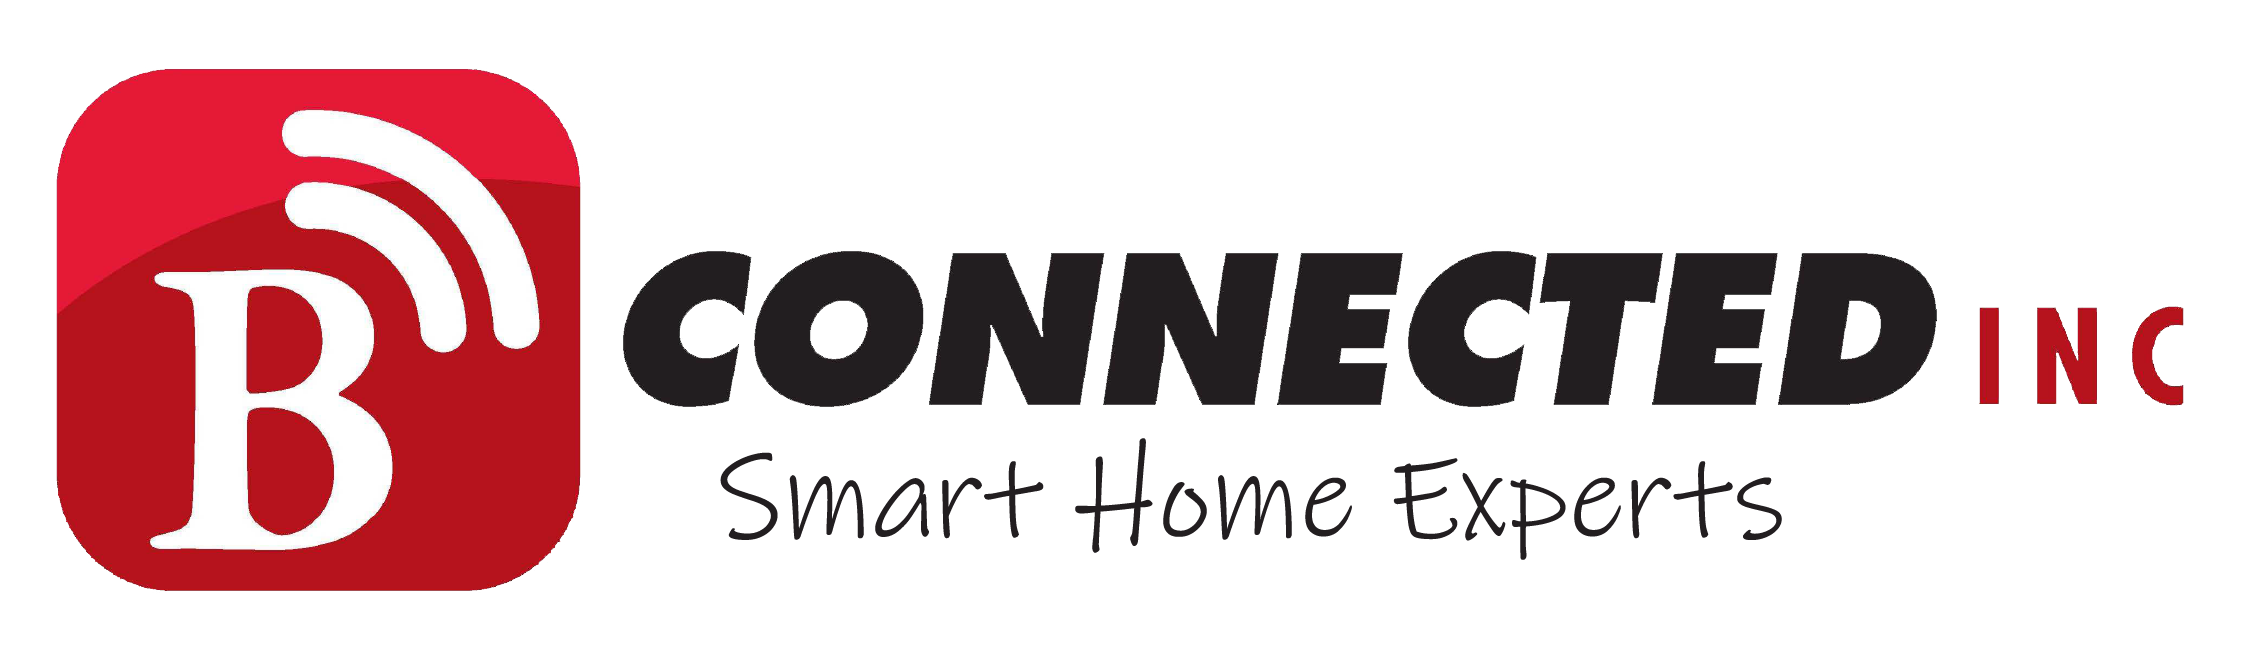 B connect official logo with no background